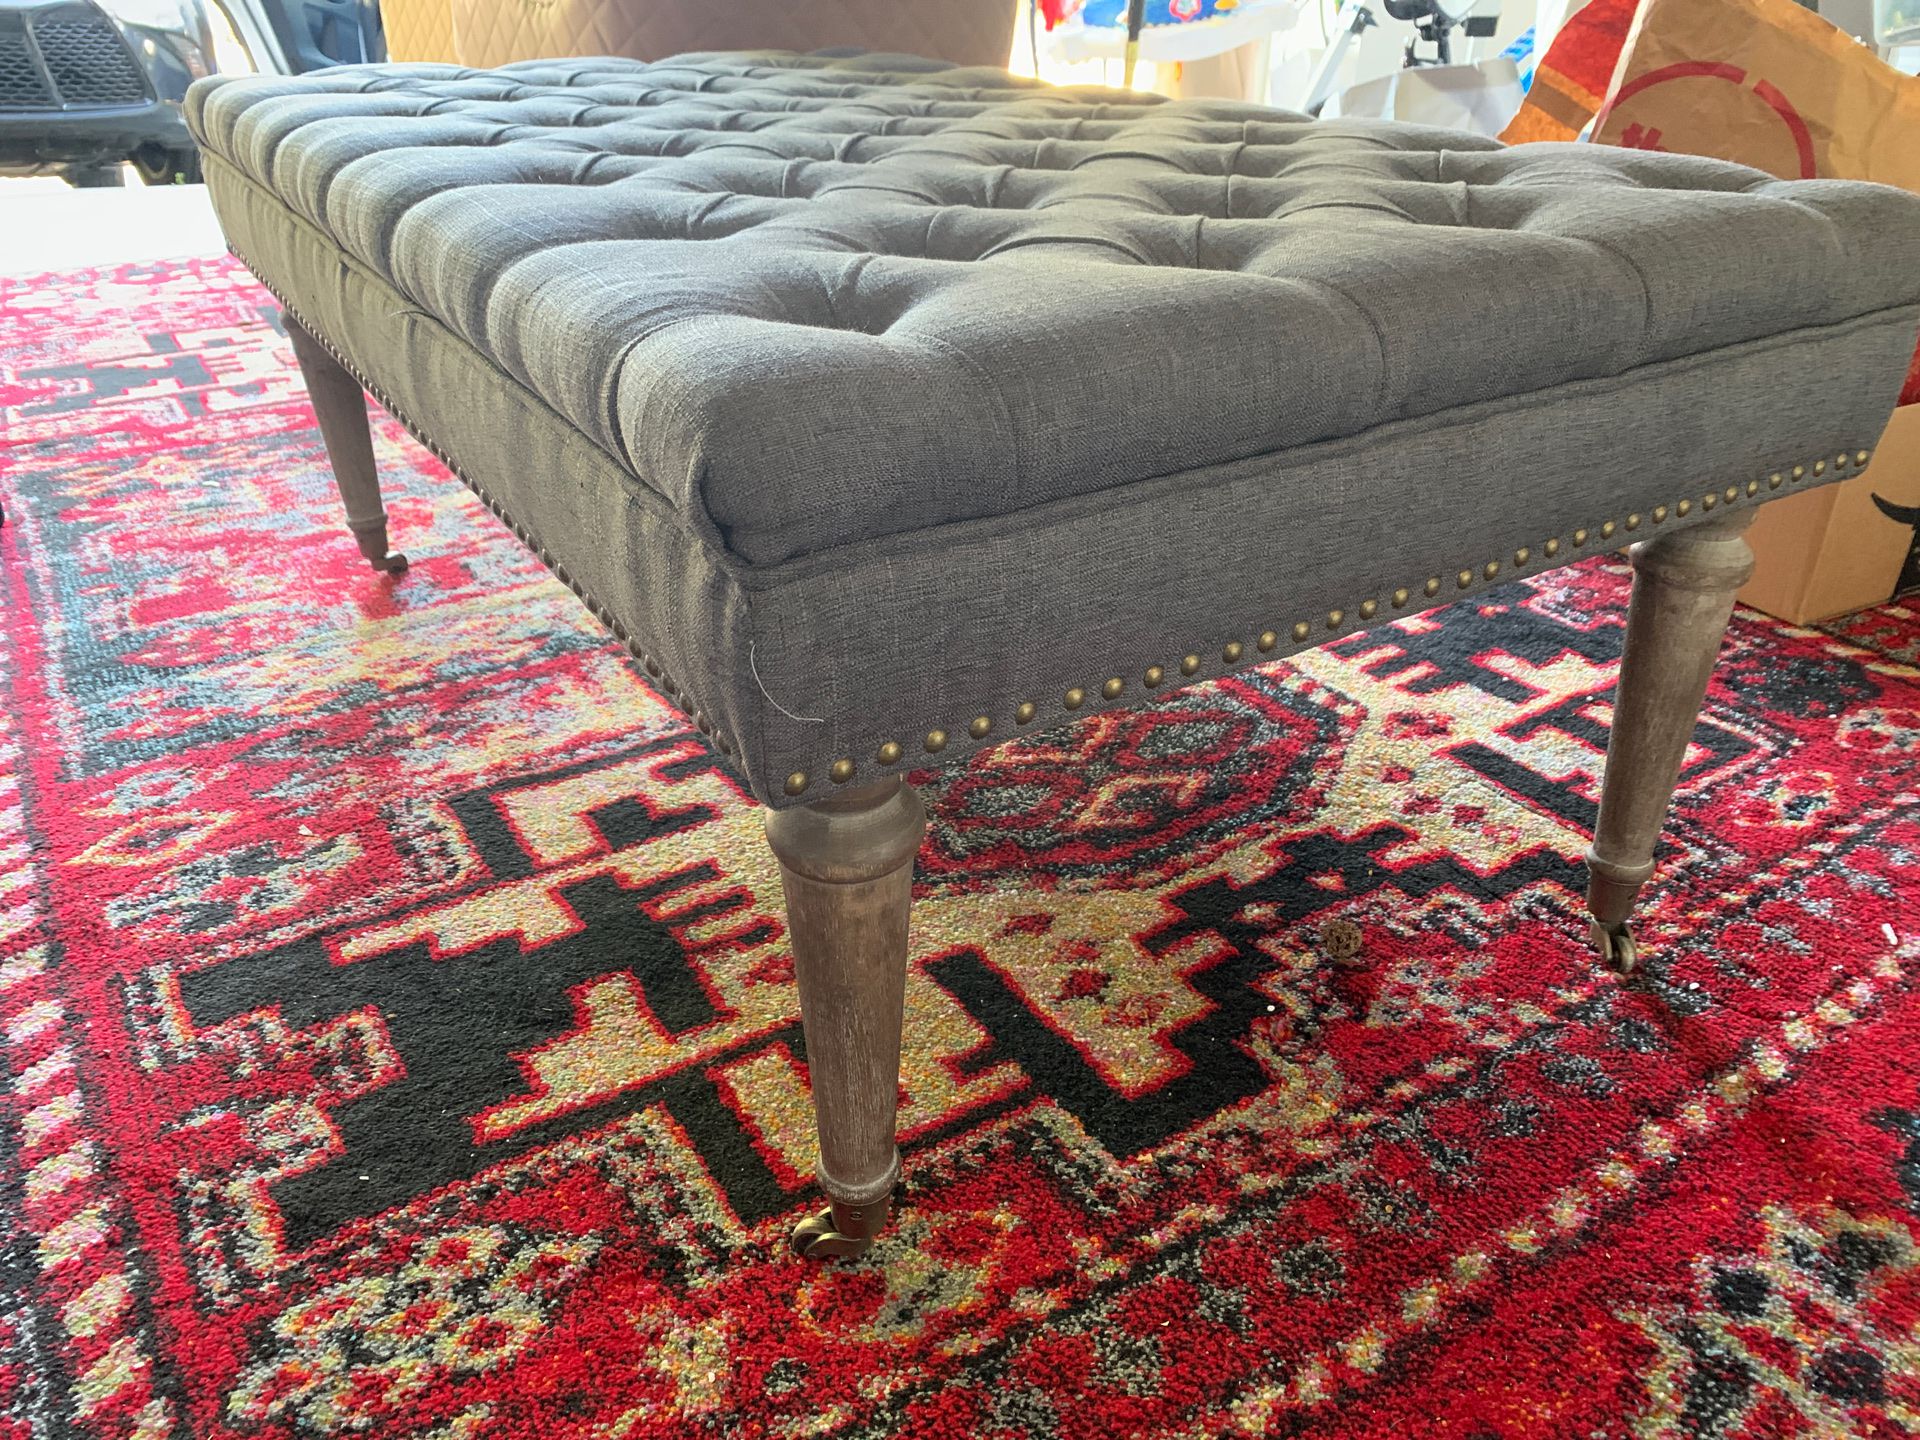 27.5 in by 47 inch length x 19 inch height tufted gray ottoman with wheels